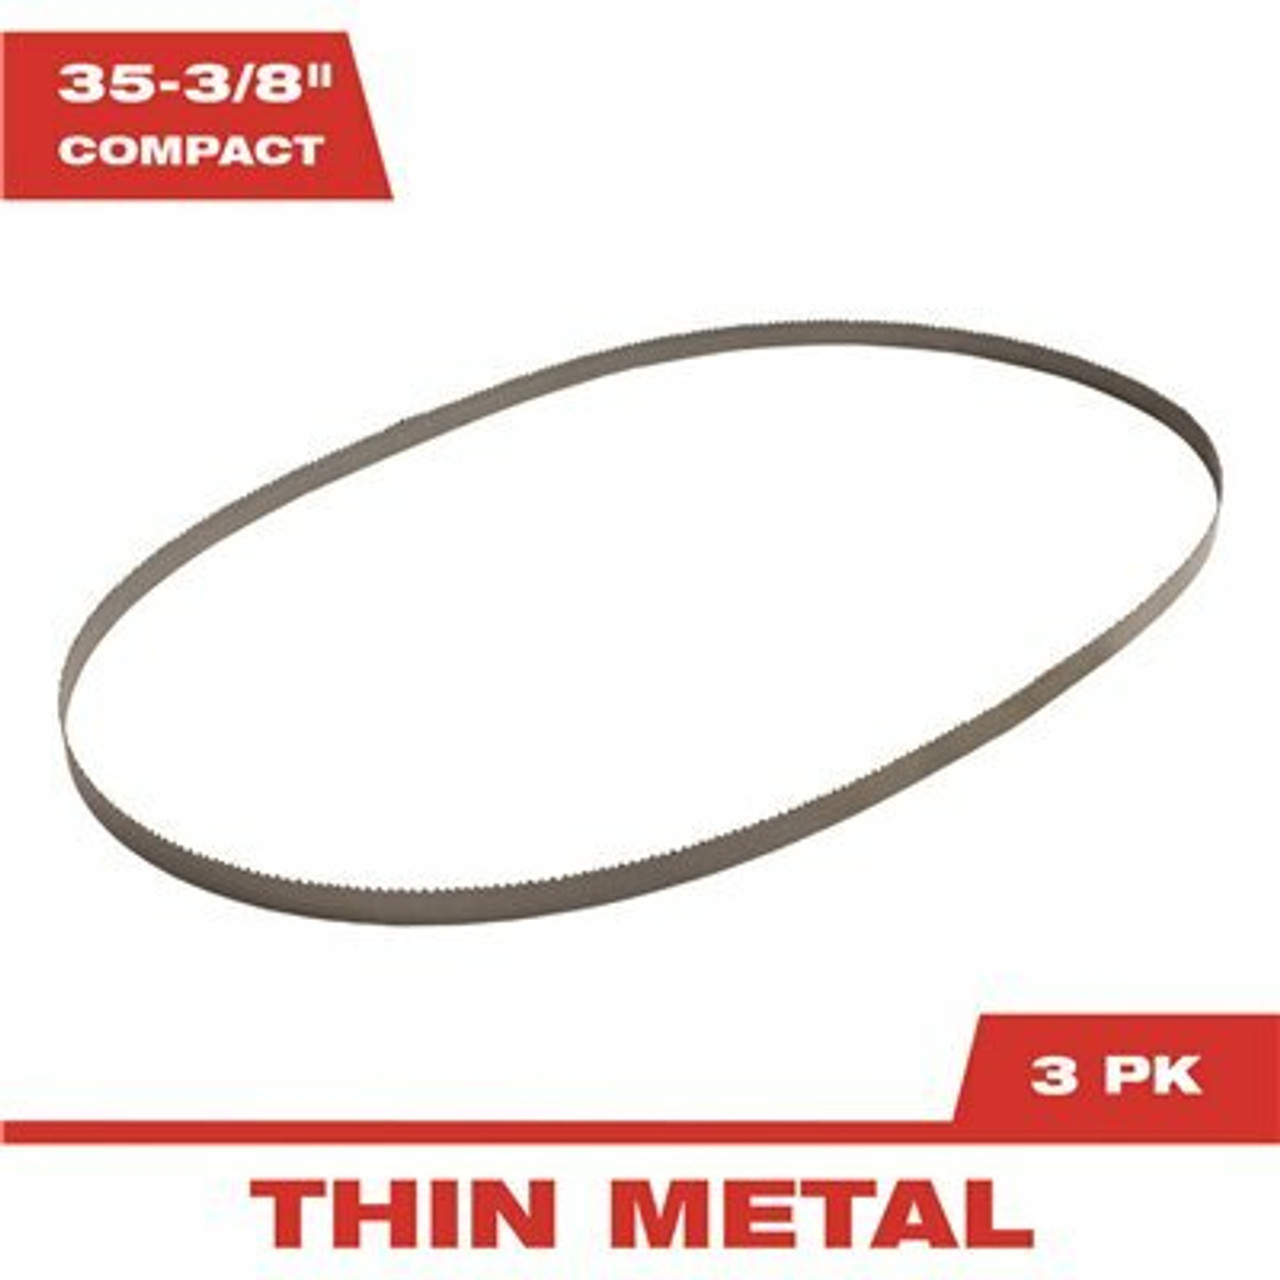 Milwaukee 35-3/8 In. 18 Tpi Compact Bi-Metalband Saw Blade (3-Pack) For M18 Fuel/Corded Compact Bandsaw